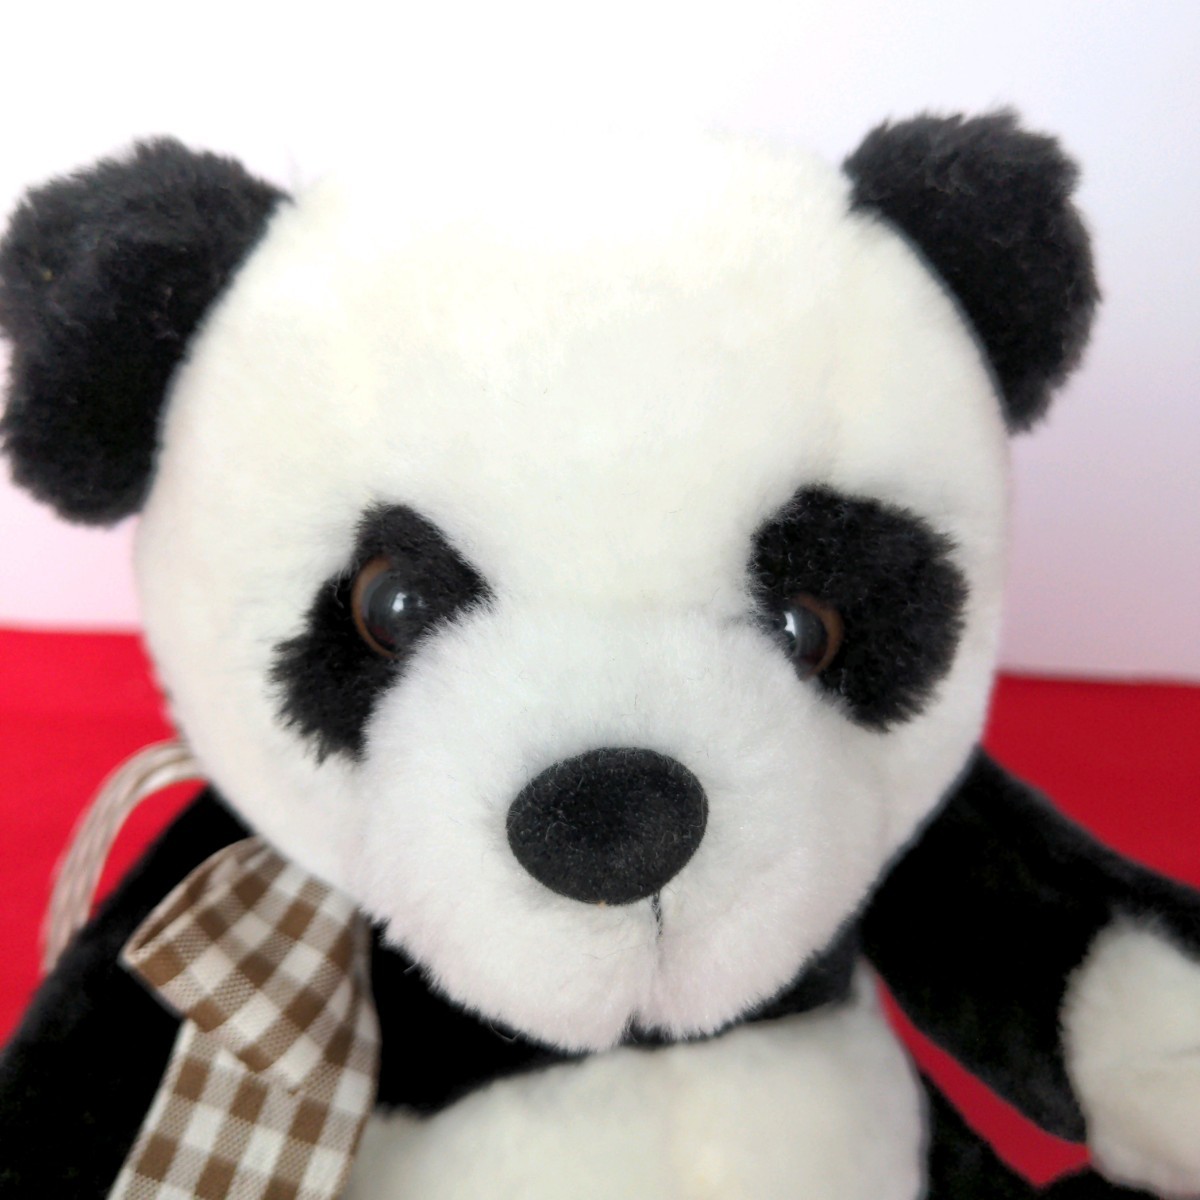  Panda soft toy soft toy ... Panda approximately 20cm silver chewing gum check ribbon tea color lovely soft feel of Showa Retro ..